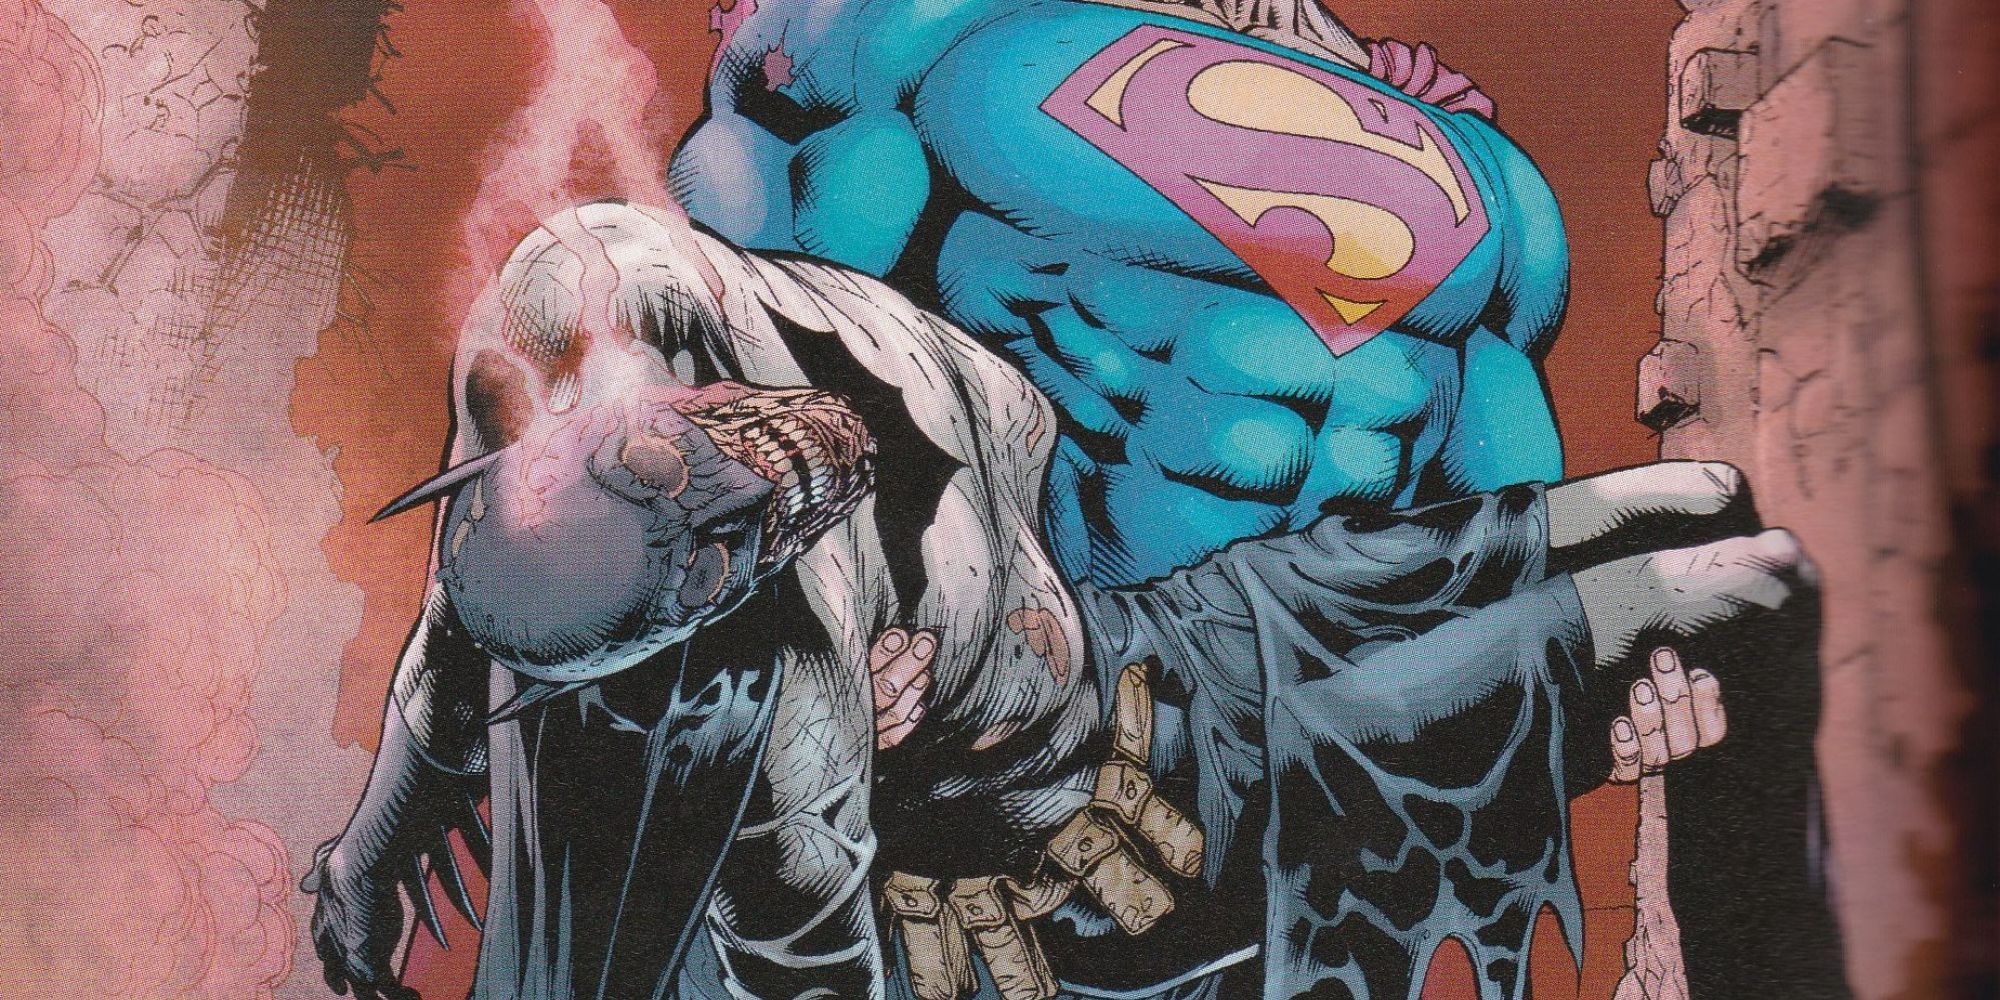 Superman carries Batman's body during the events of Final Crisis